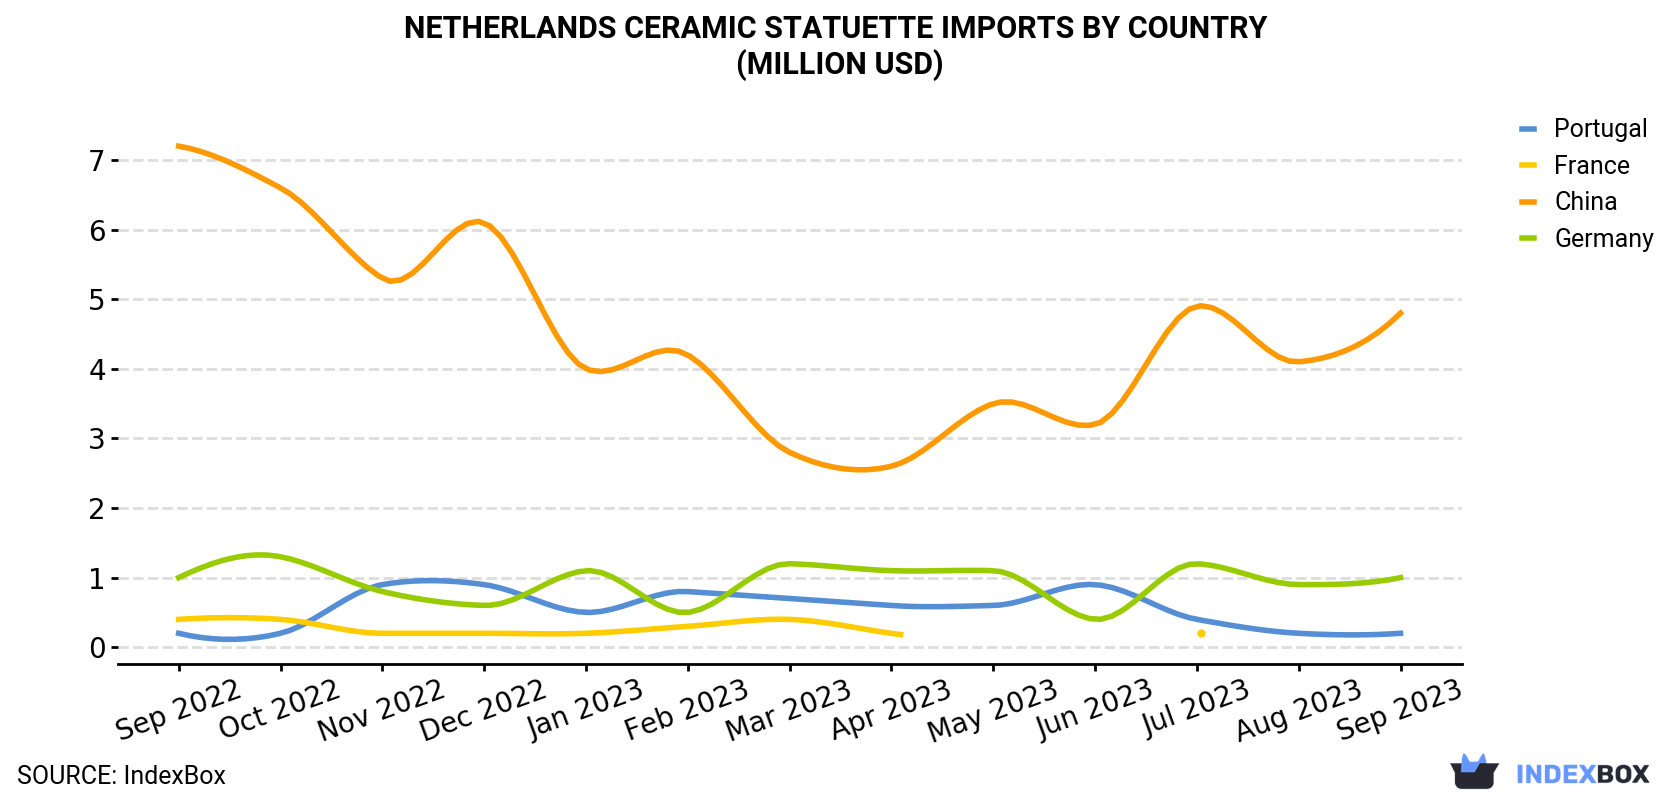 Netherlands Ceramic Statuette Imports By Country (Million USD)